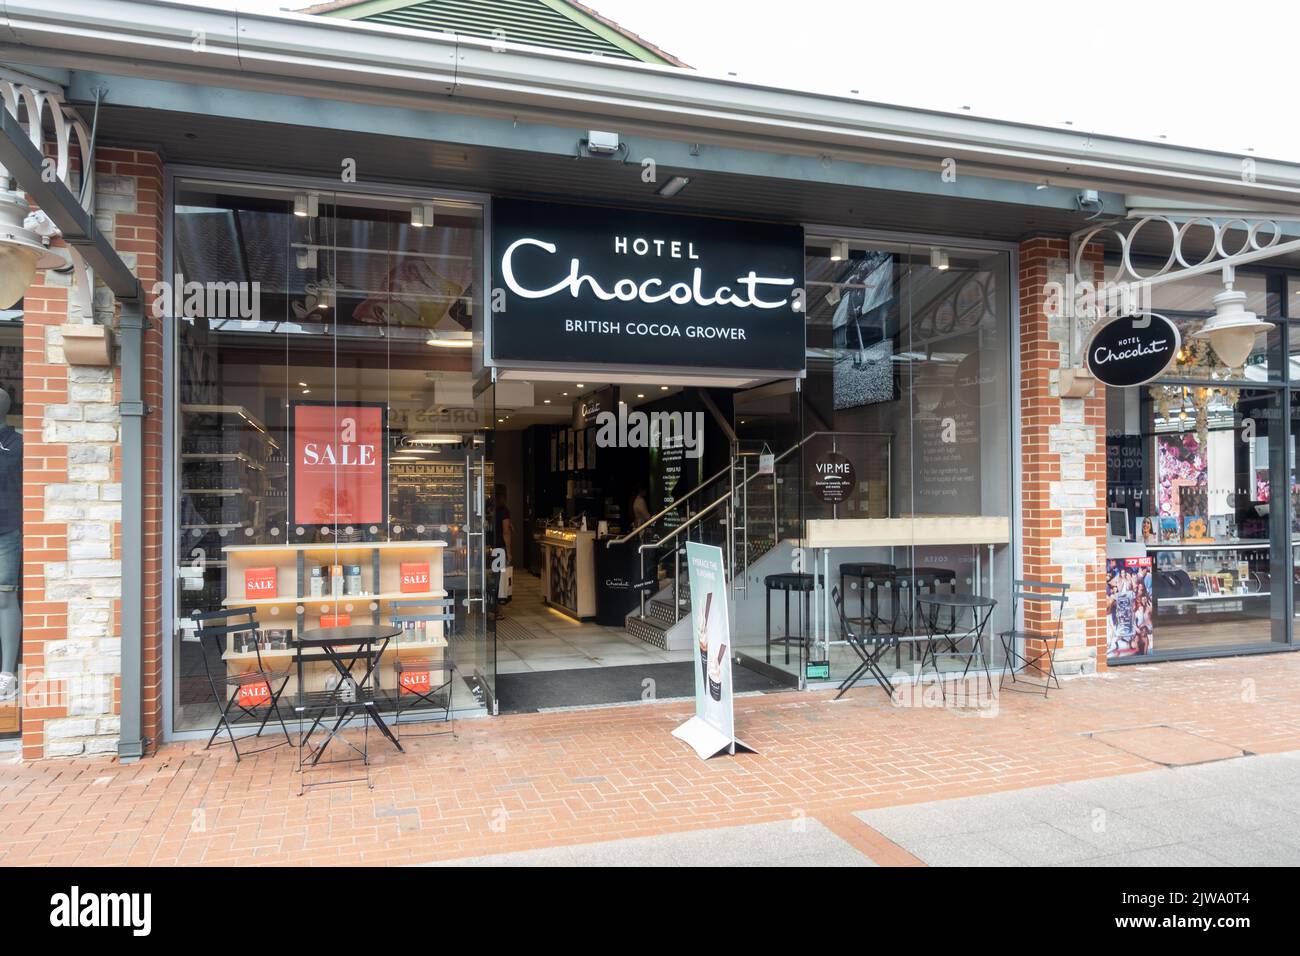 Hotel Chocolat store a, British Cocoa Grower presso il Clarks Village outlet shopping, Street, Somerset, Inghilterra, Regno Unito Foto Stock